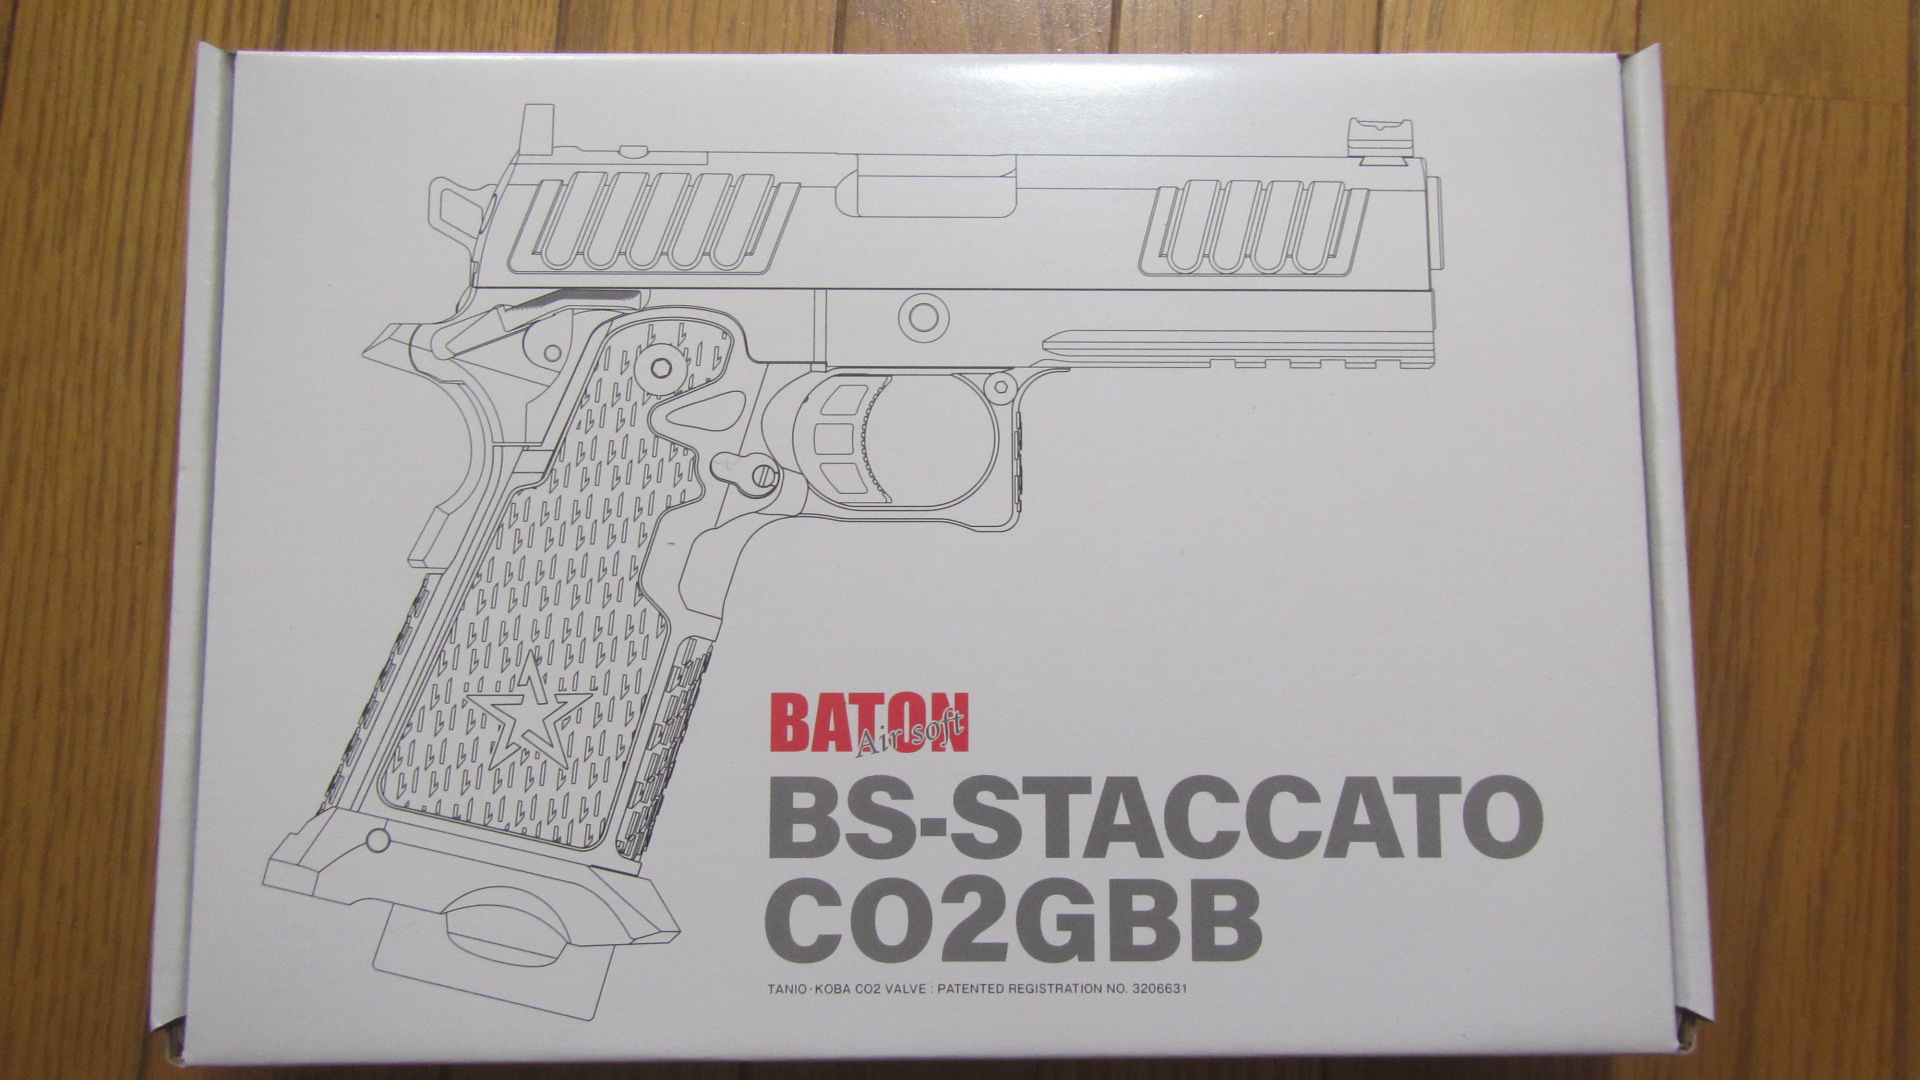 BS-STACCATO CO2GBB